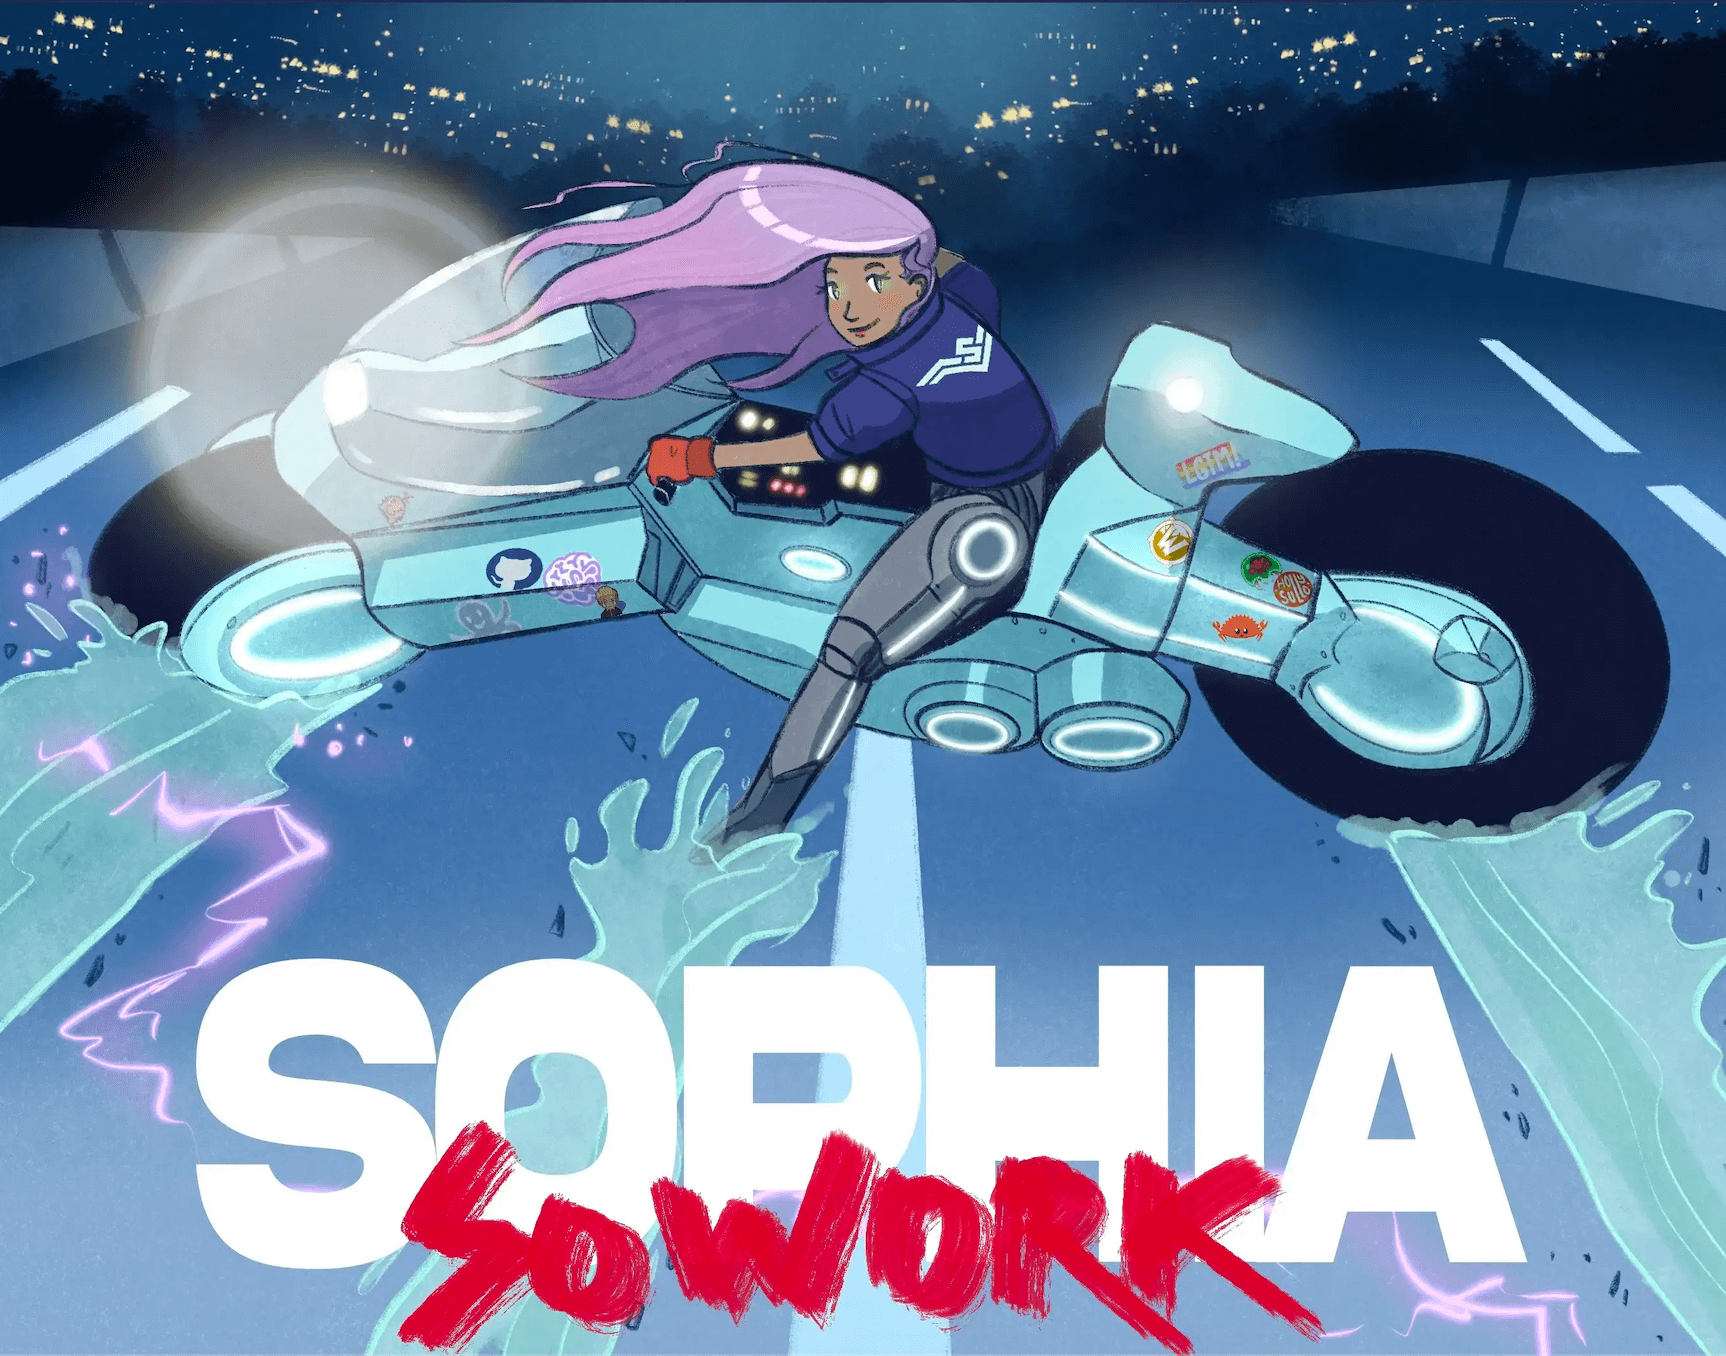 Sophia Bot from SoWork riding her motorcycle in a cyberpunk environment